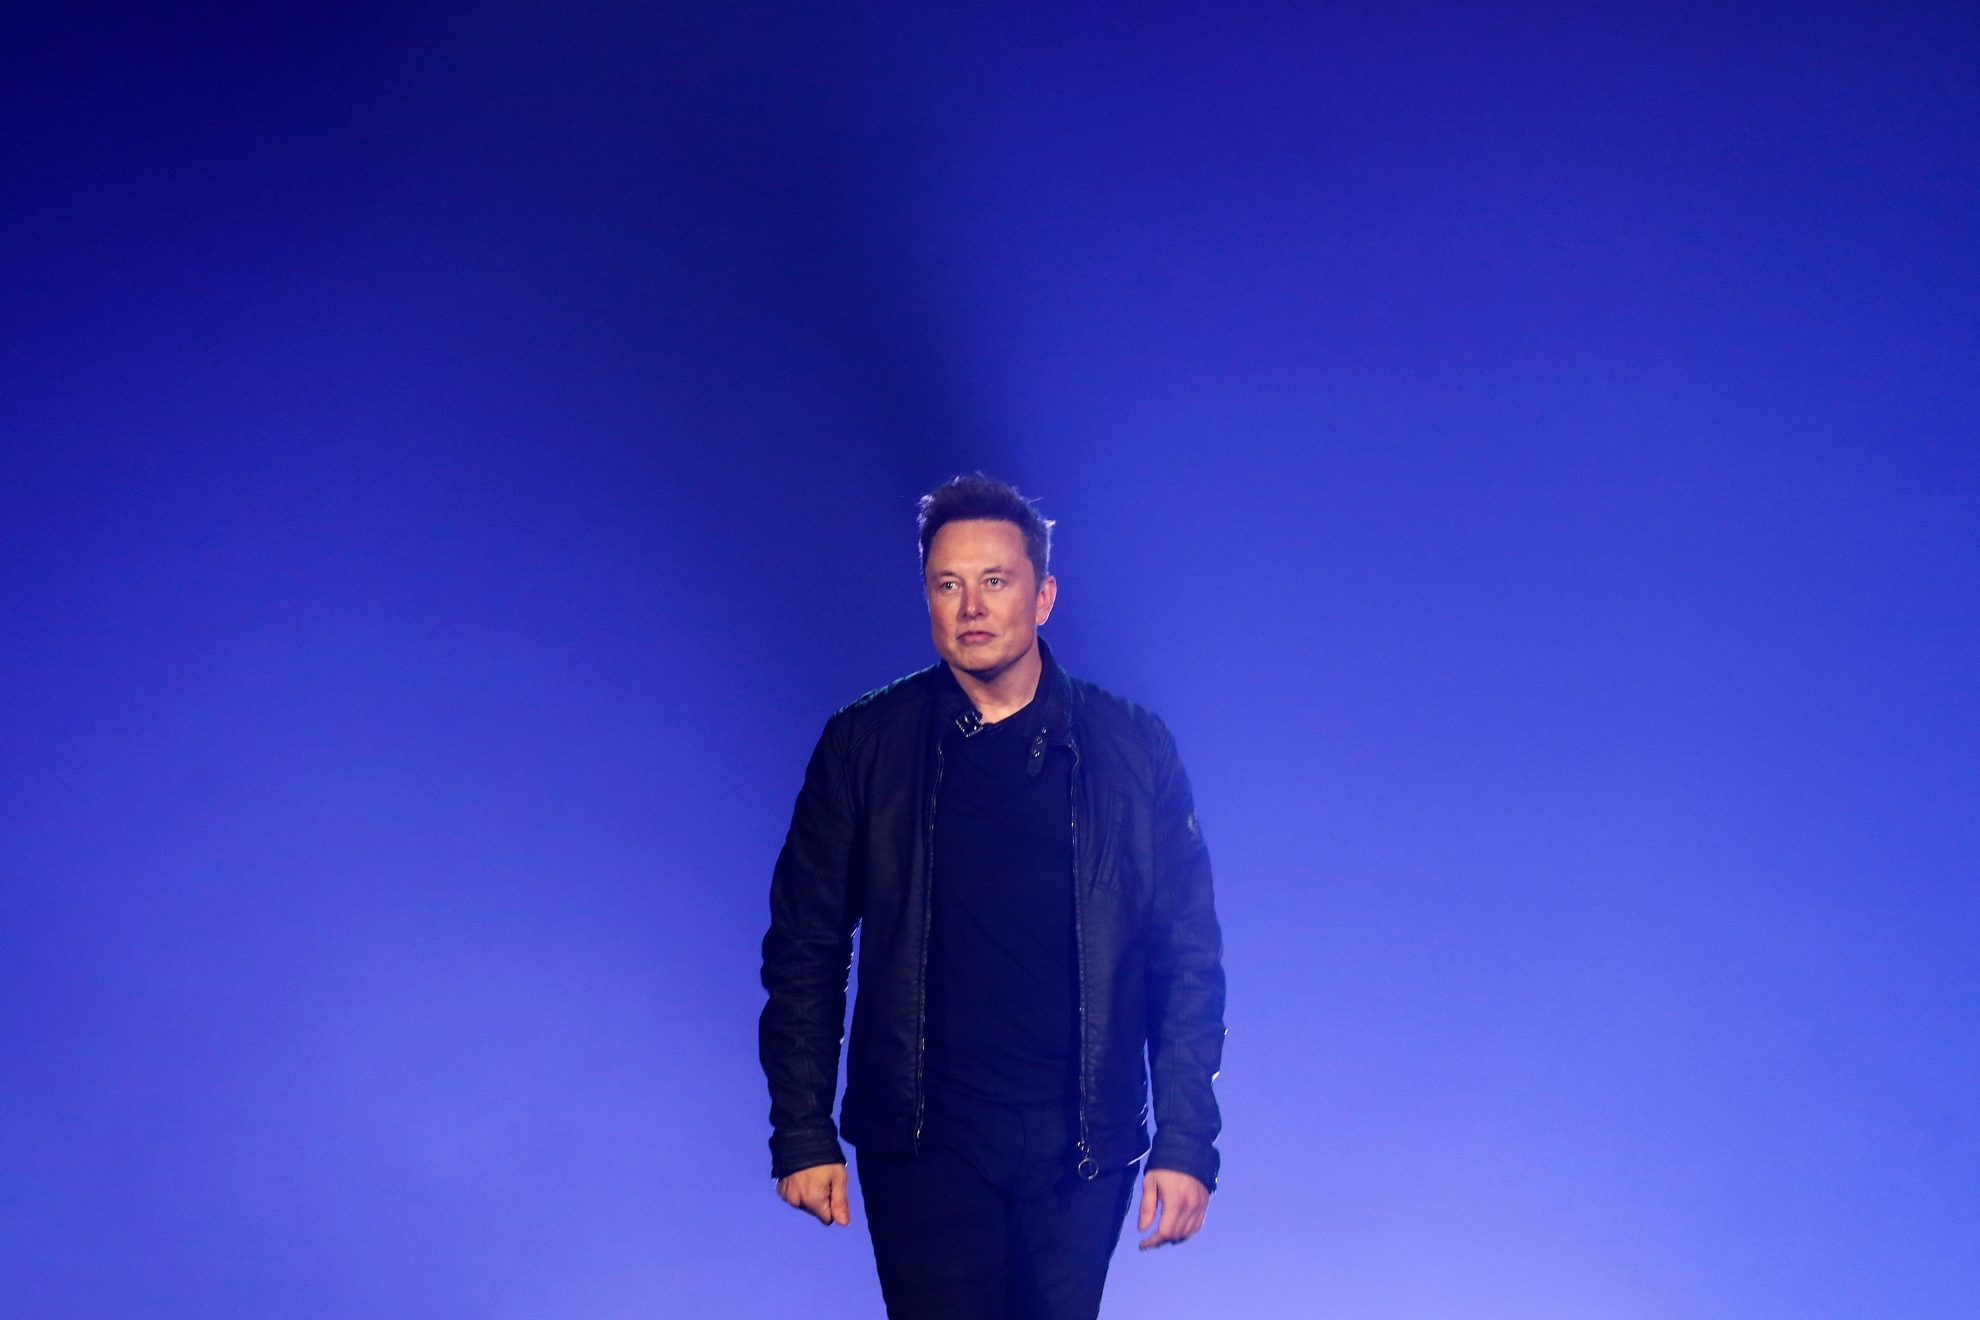 Tesla CEO Elon Musk introduces the Cybertruck at Tesla's design studio Thursday, Nov. 21, 2019, in Hawthorne, Calif. Peiter Zatko, the former Twitter security chief who's accused the company of negligence with privacy and security in a whistleblower complaint, will testify before Congress on Tuesday, Sept. 13, 2022. Zatko's accusations are also playing into Musk's battle with Twitter to get out of his $44 billion bid to buy the company.  / AP